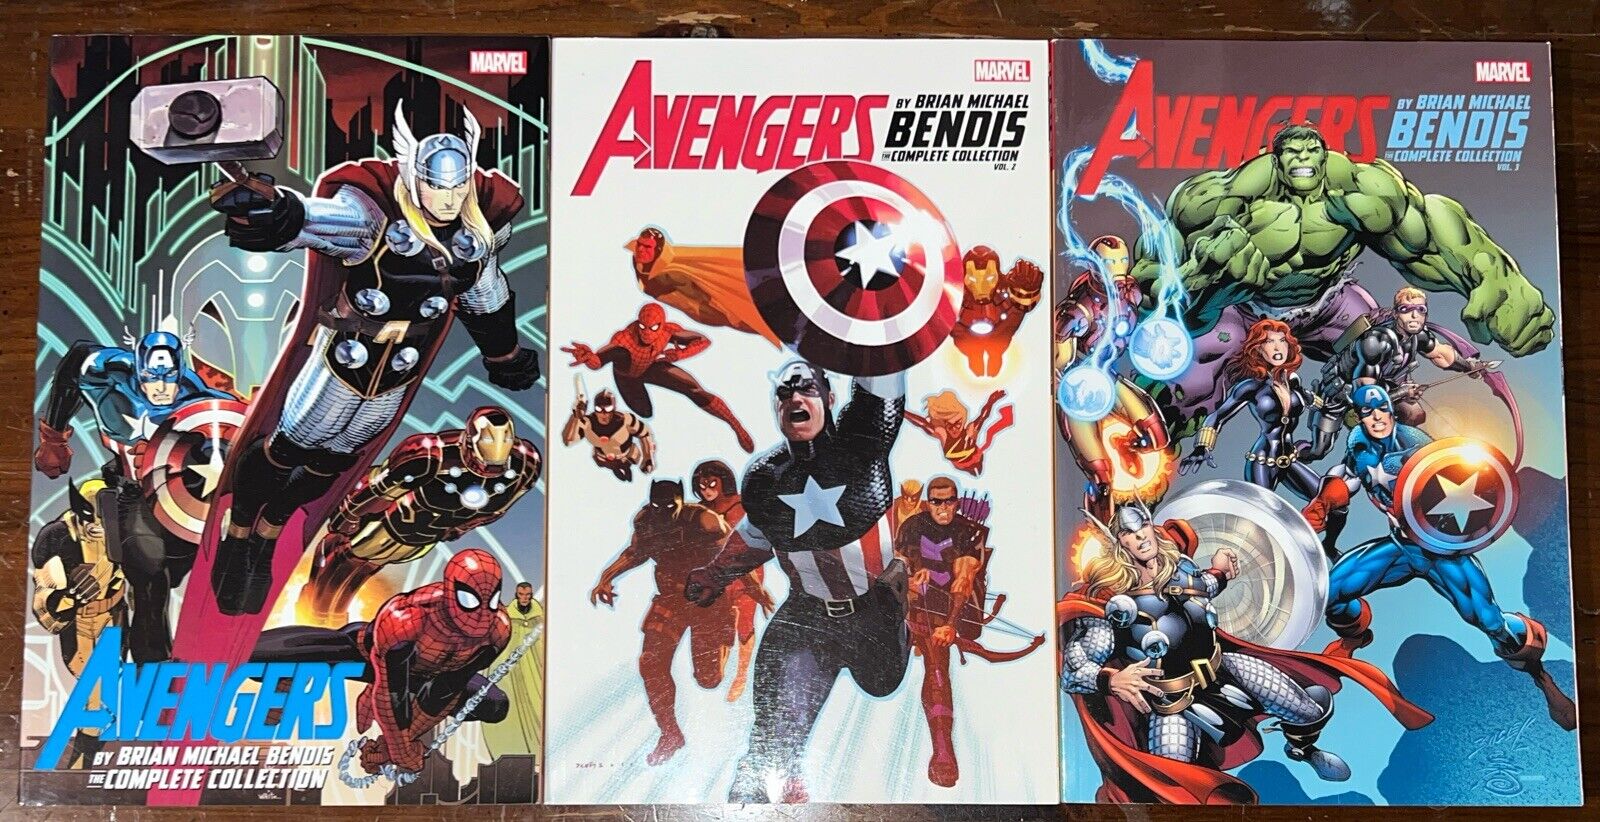 Avengers by Brian Michael Bendis: The Complete Collection #1 - 3 (Marvel, 2017)